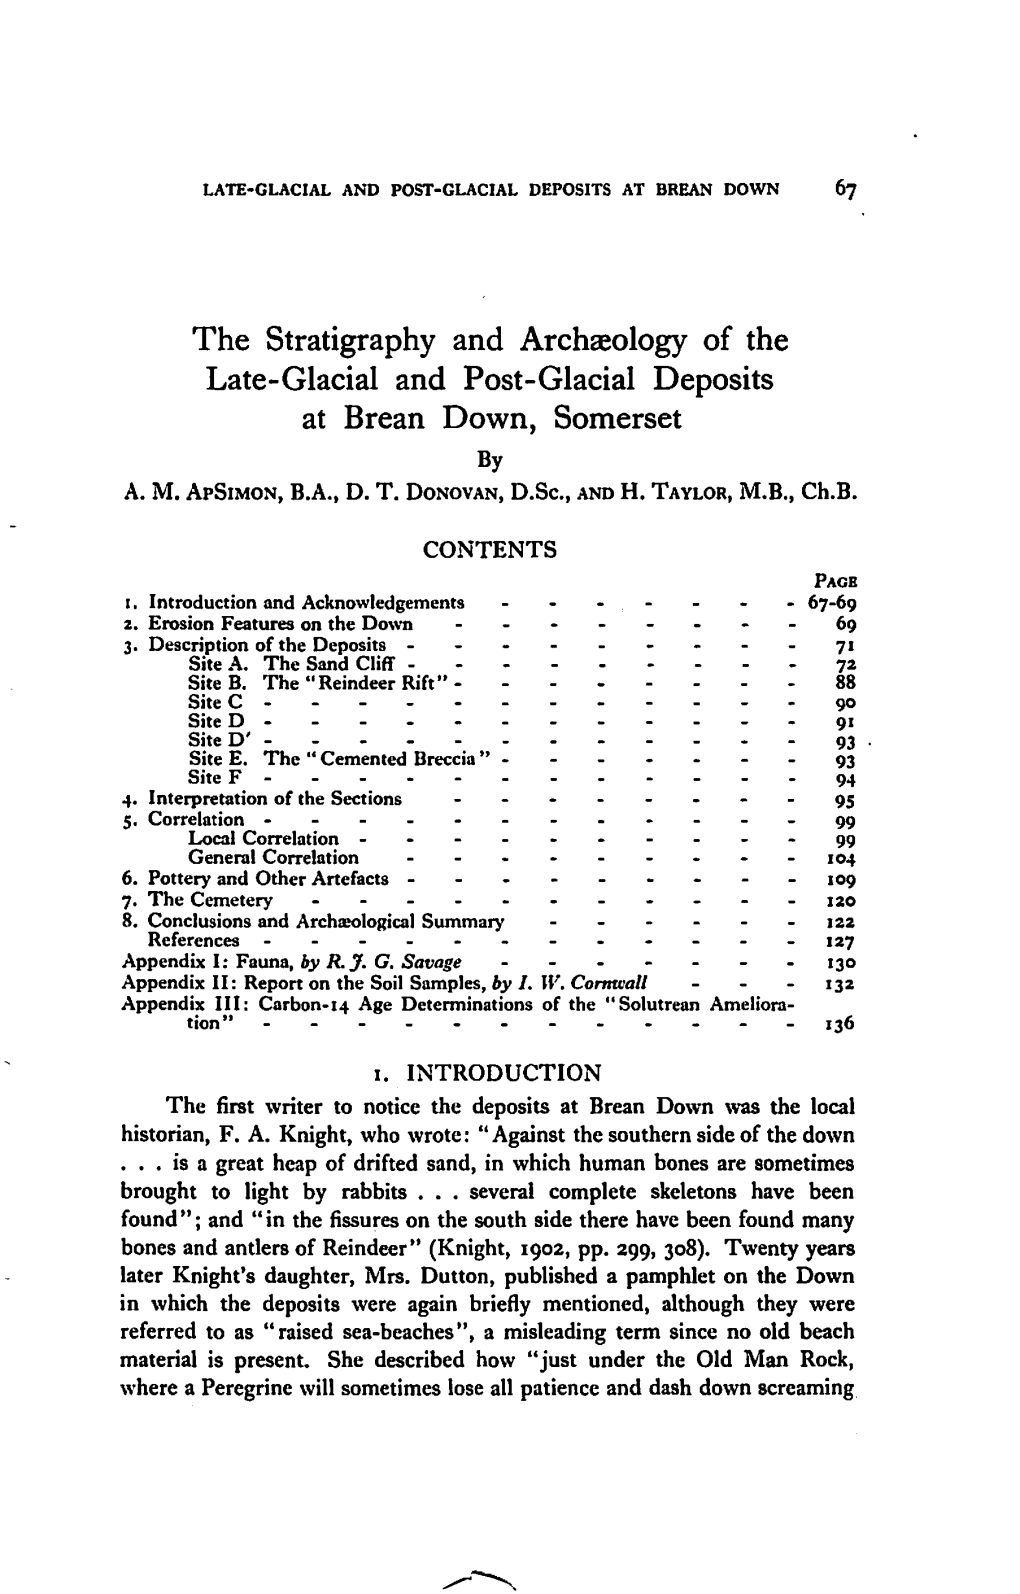 The Stratigraphy and Archaeology of the Late-Glacial and Post